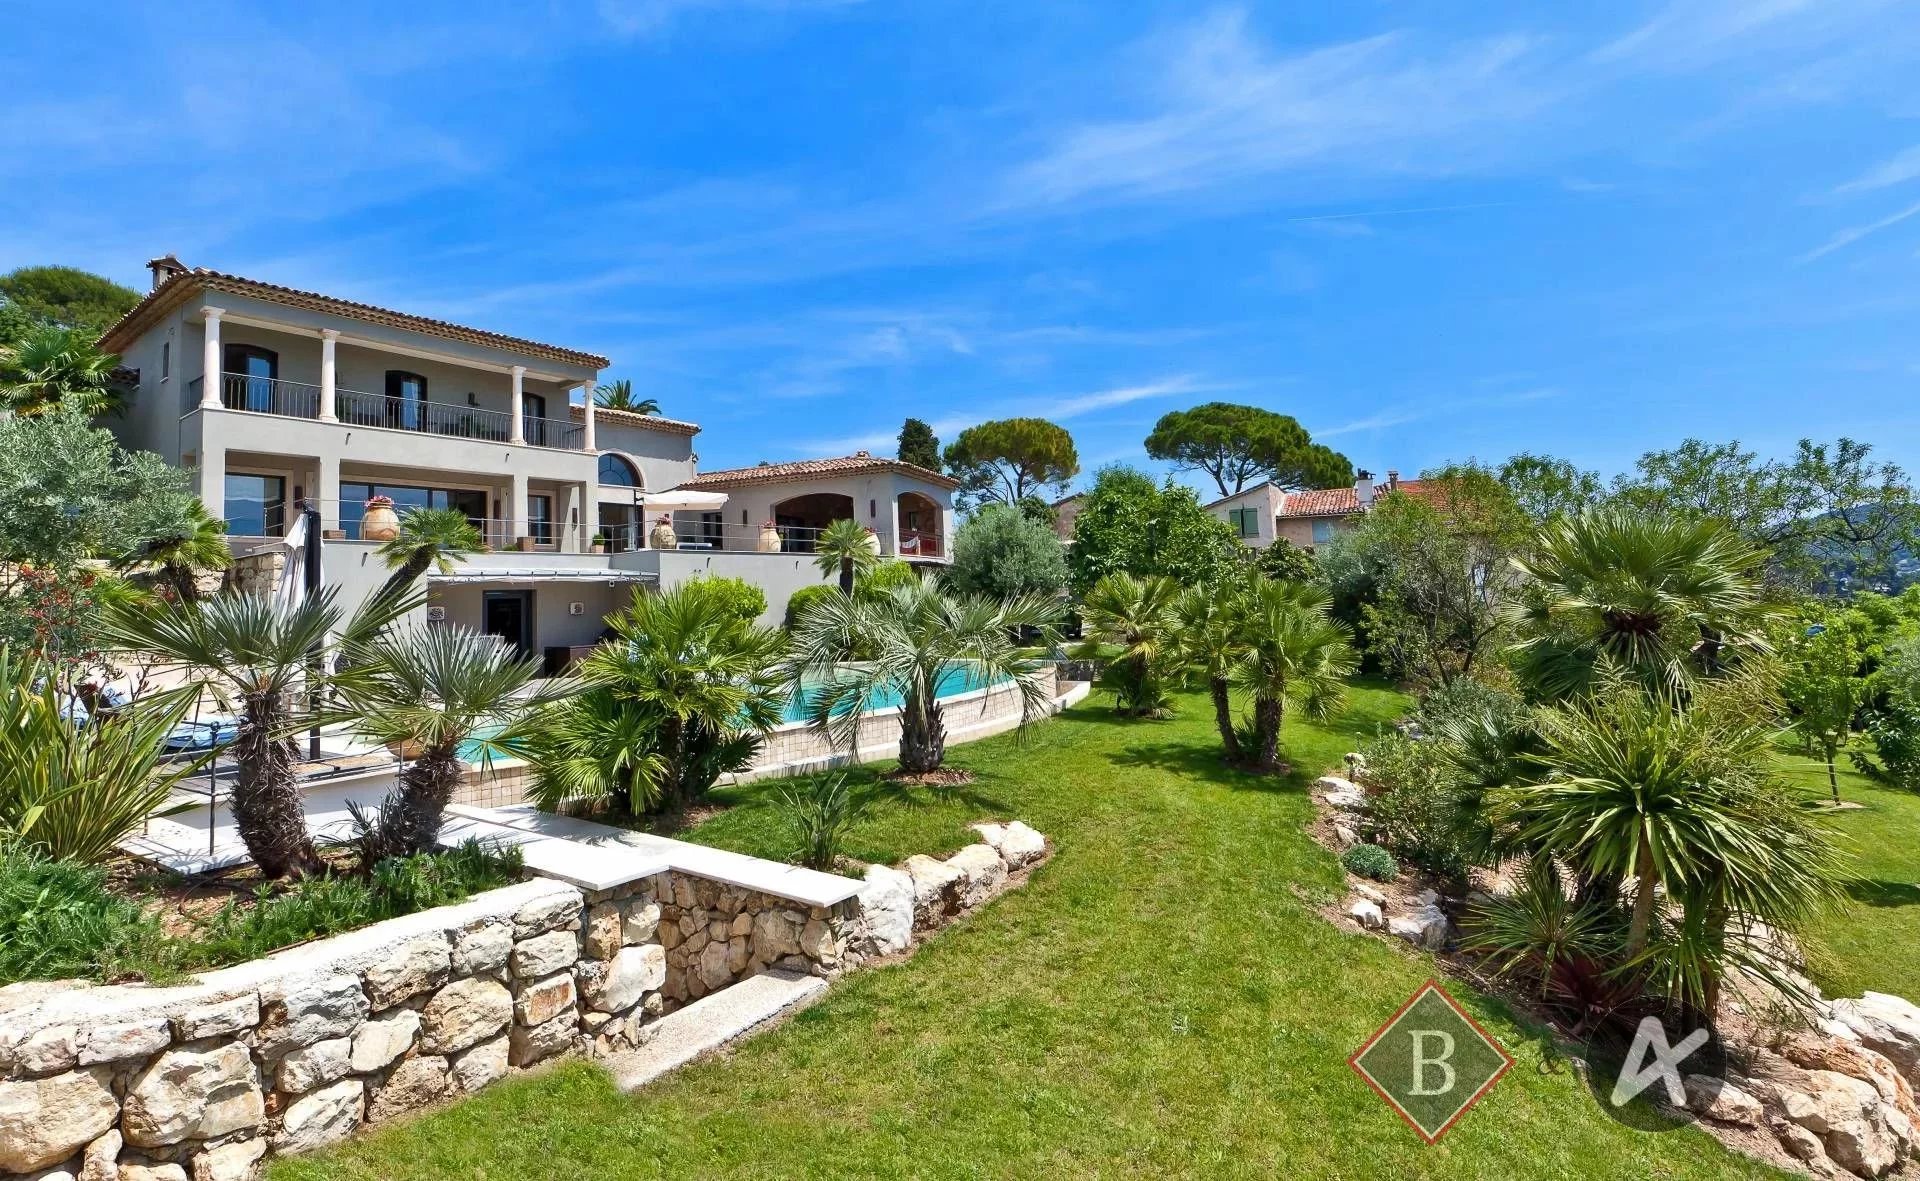 For sale - Luxury property, haven of peacefulness close to Cannes